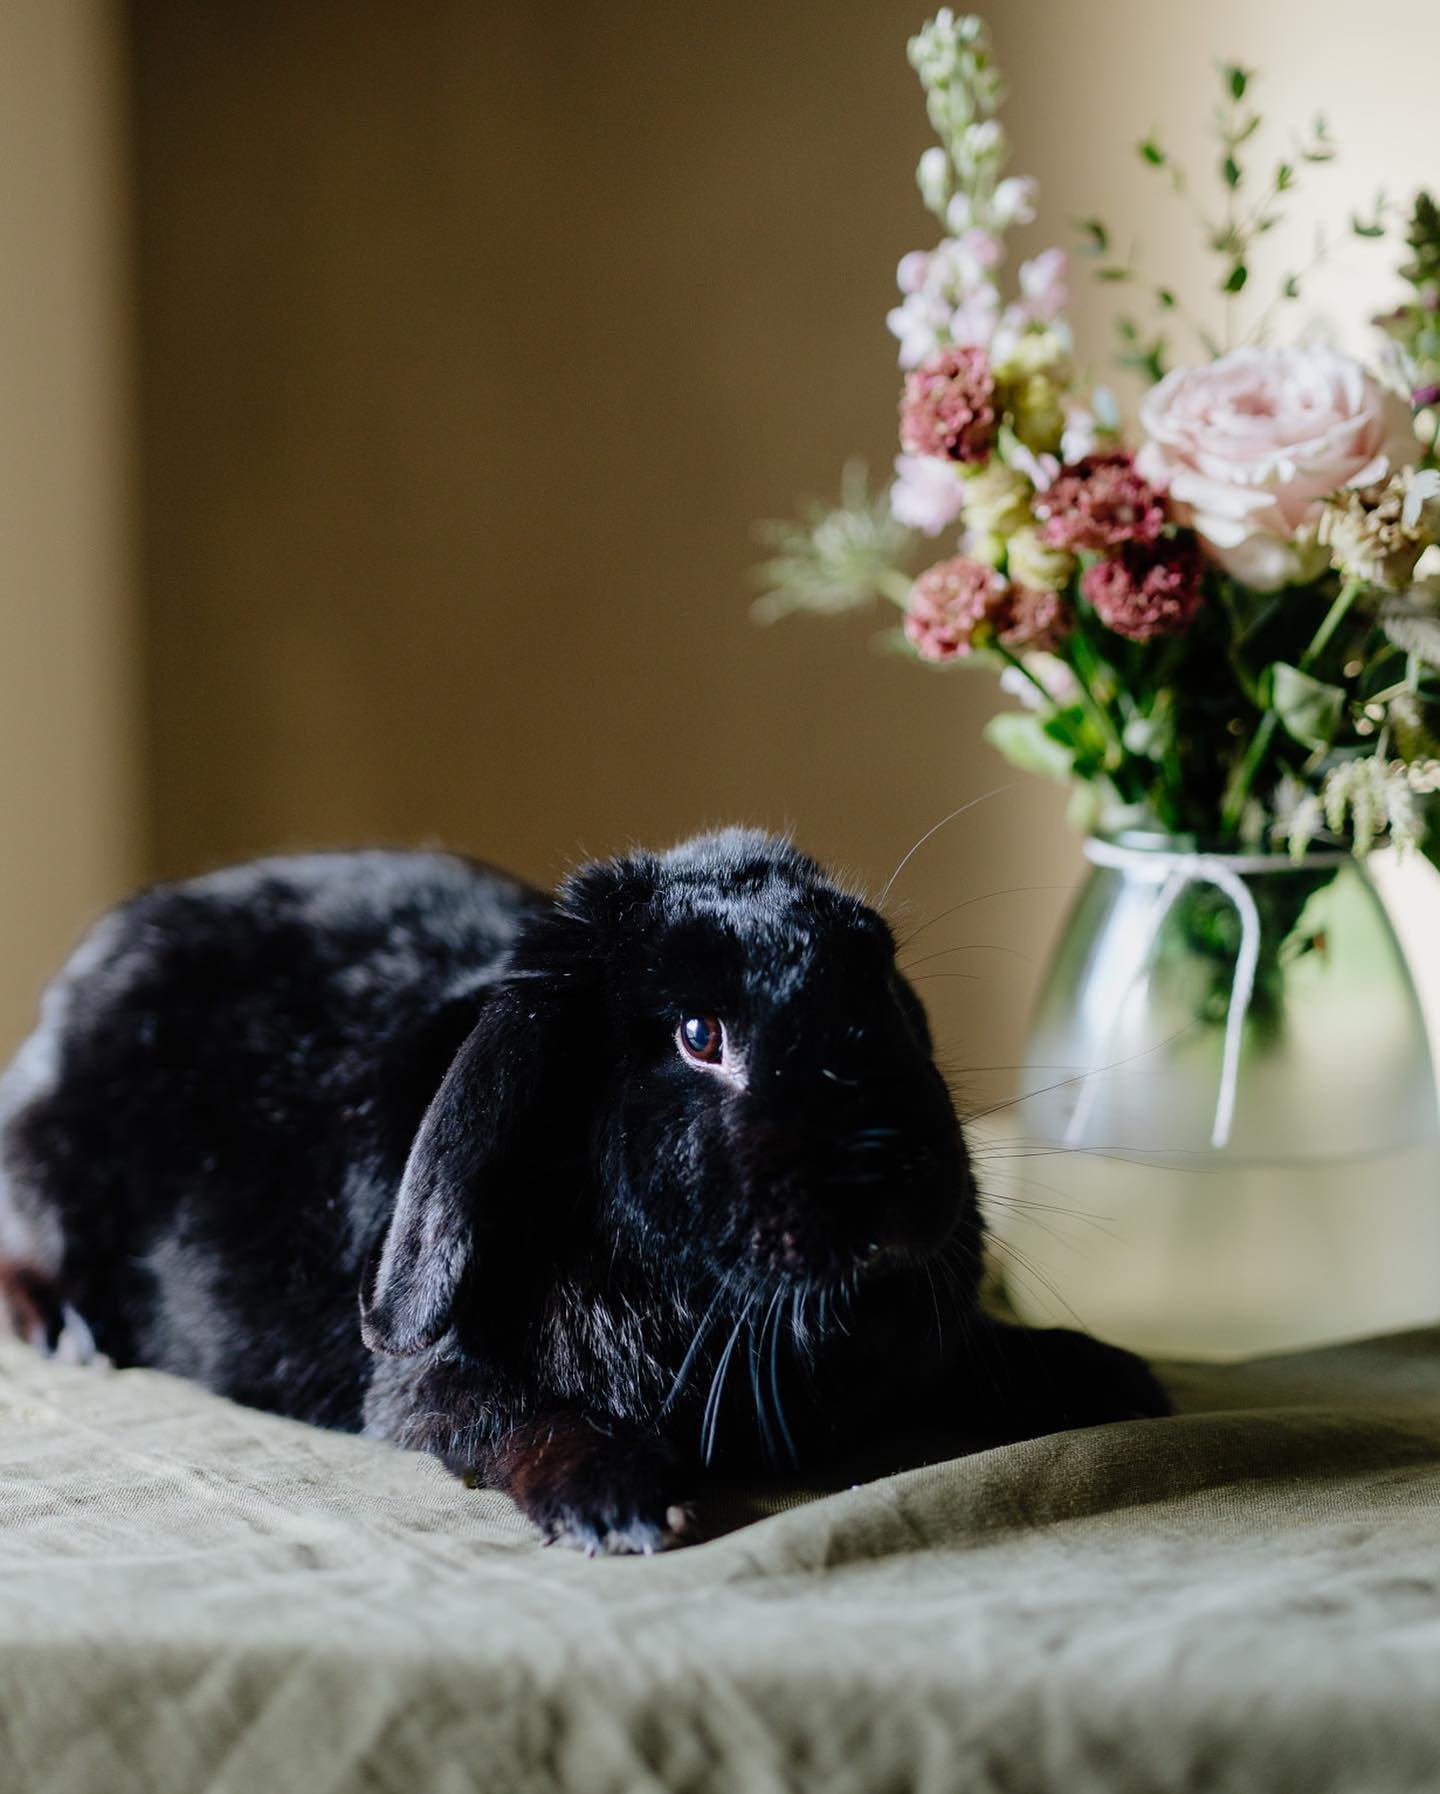 Here are a few photos of Jasper rabbit helping me in the studio to complete your Easter orders. 🐰 
Wishing everyone a lovely Easter weekend hoping it&rsquo;s restful and filled with chocolate.

Photo taken by the incredible @liamrimmingtonphoto

#fl